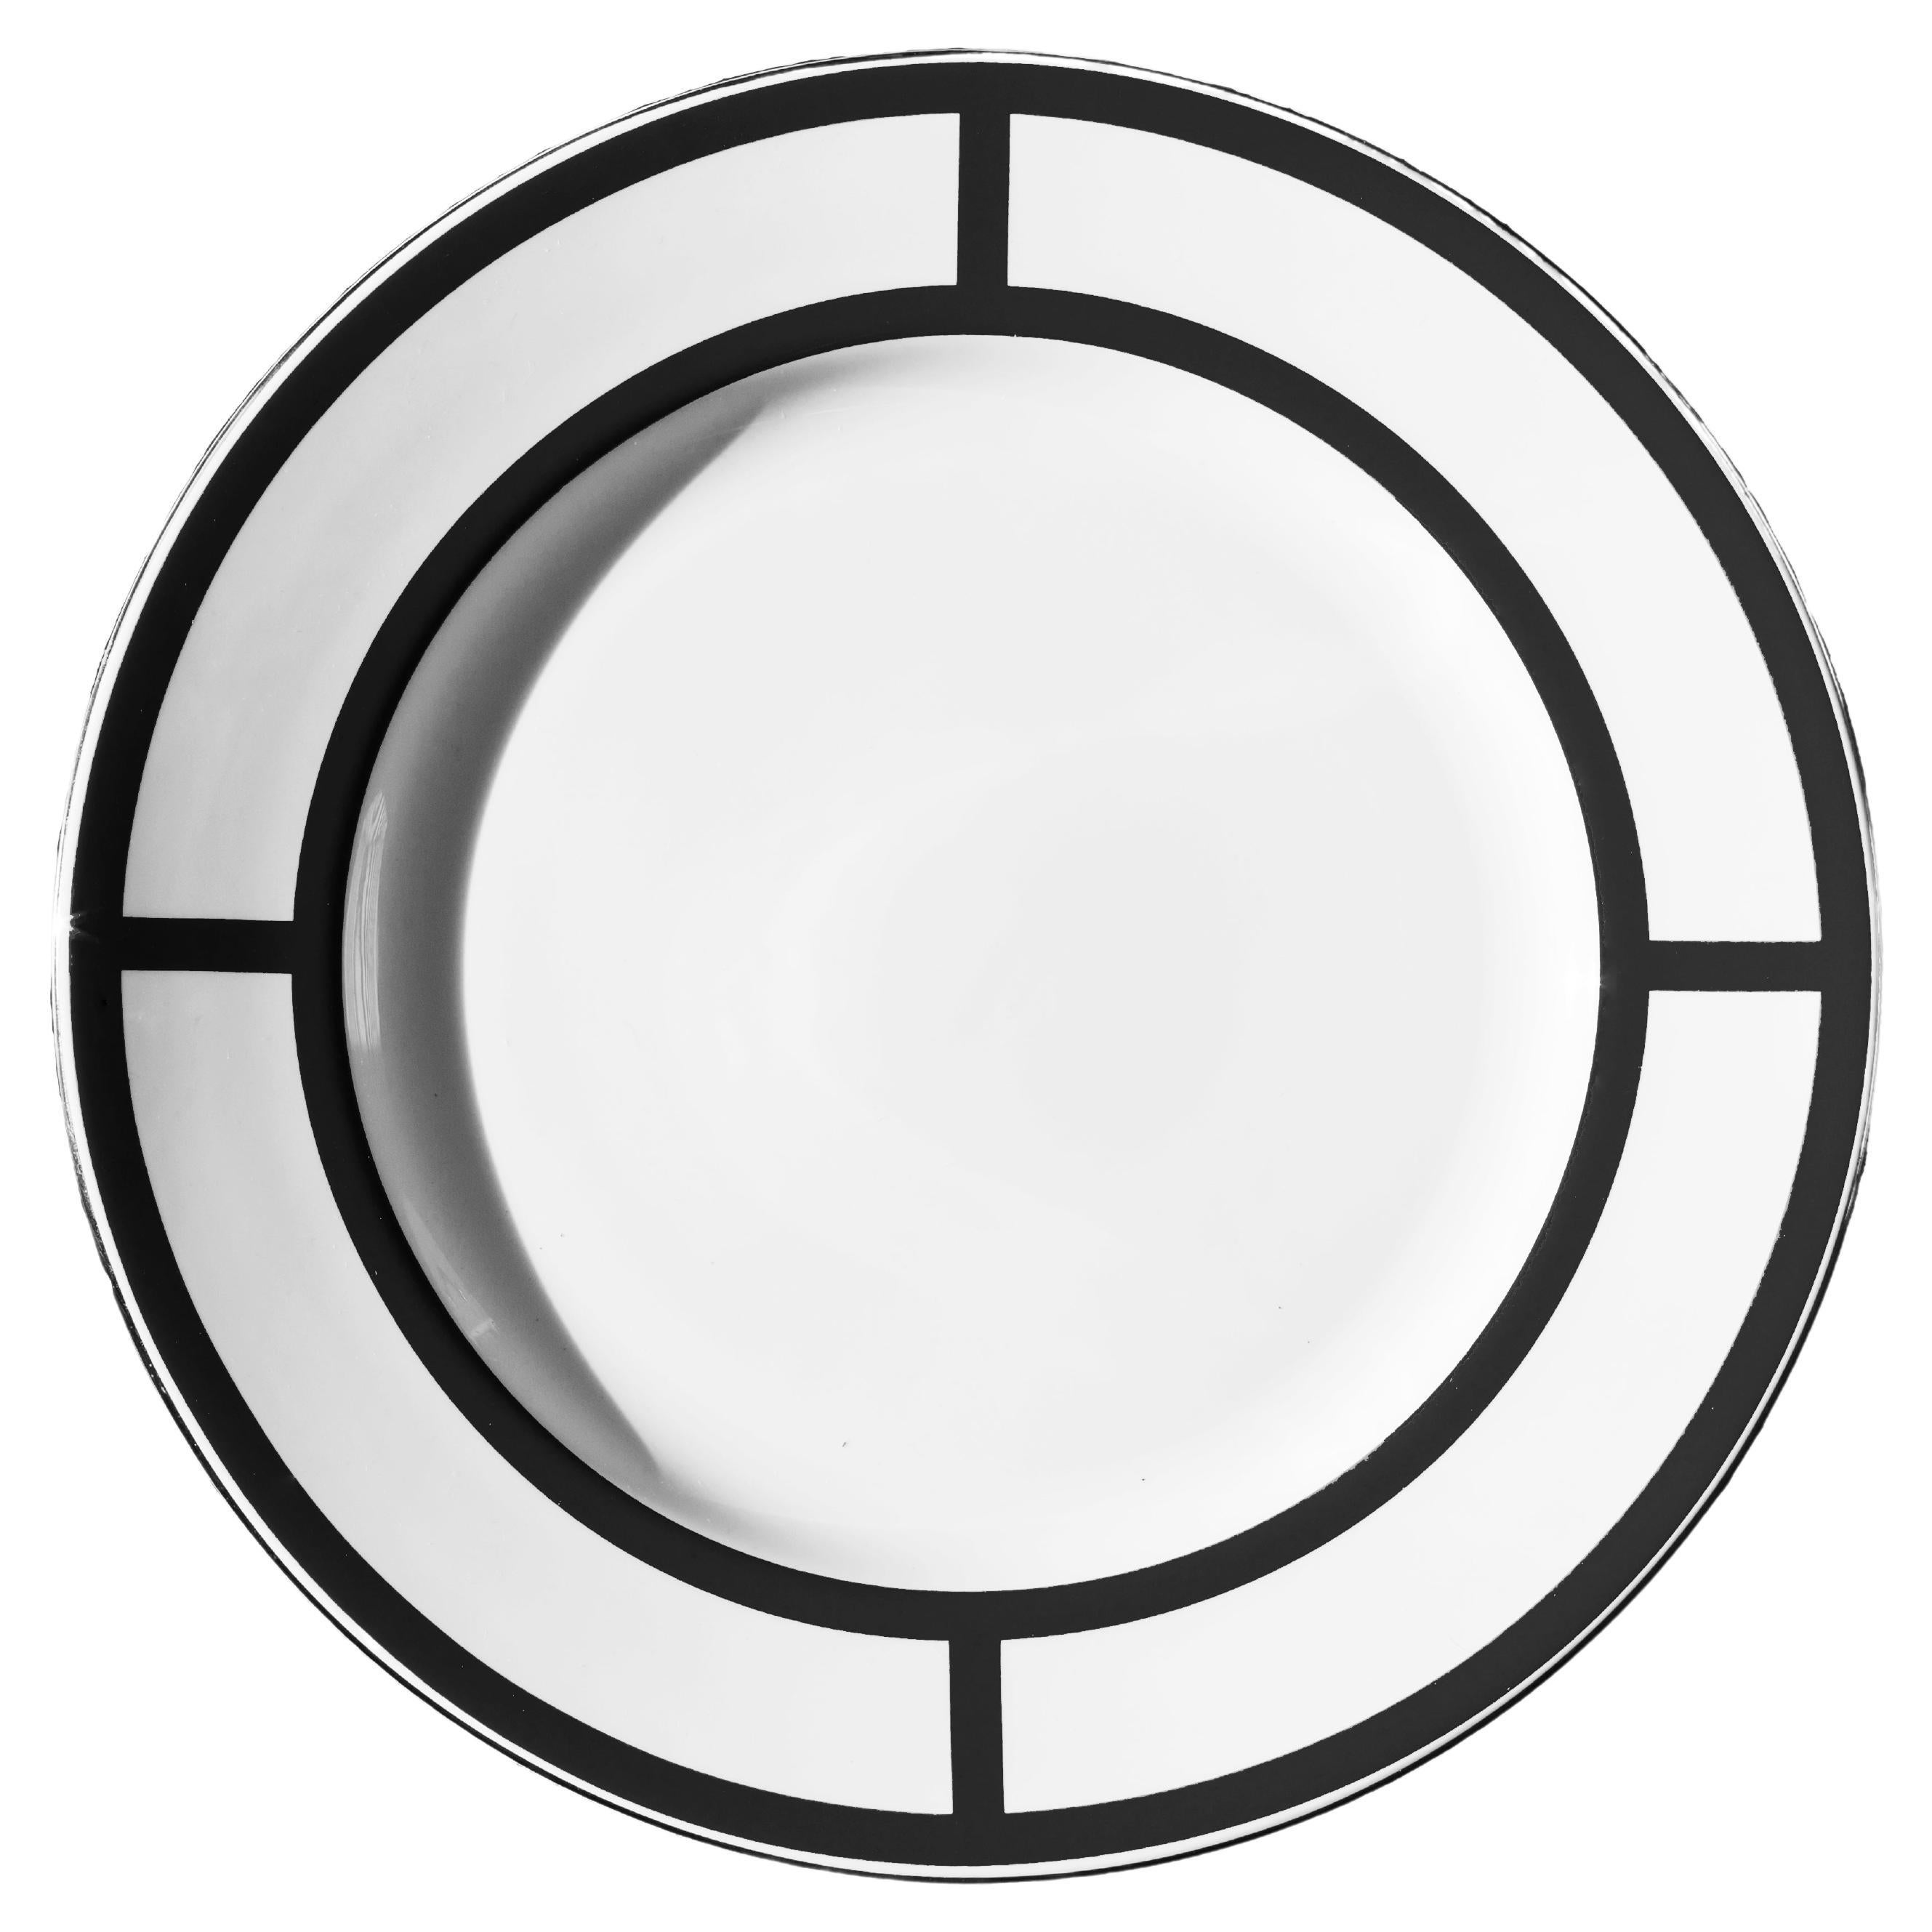 Bone China Dinner Plate with Monochrome Heritage Print, Made in Stoke-on-trent For Sale